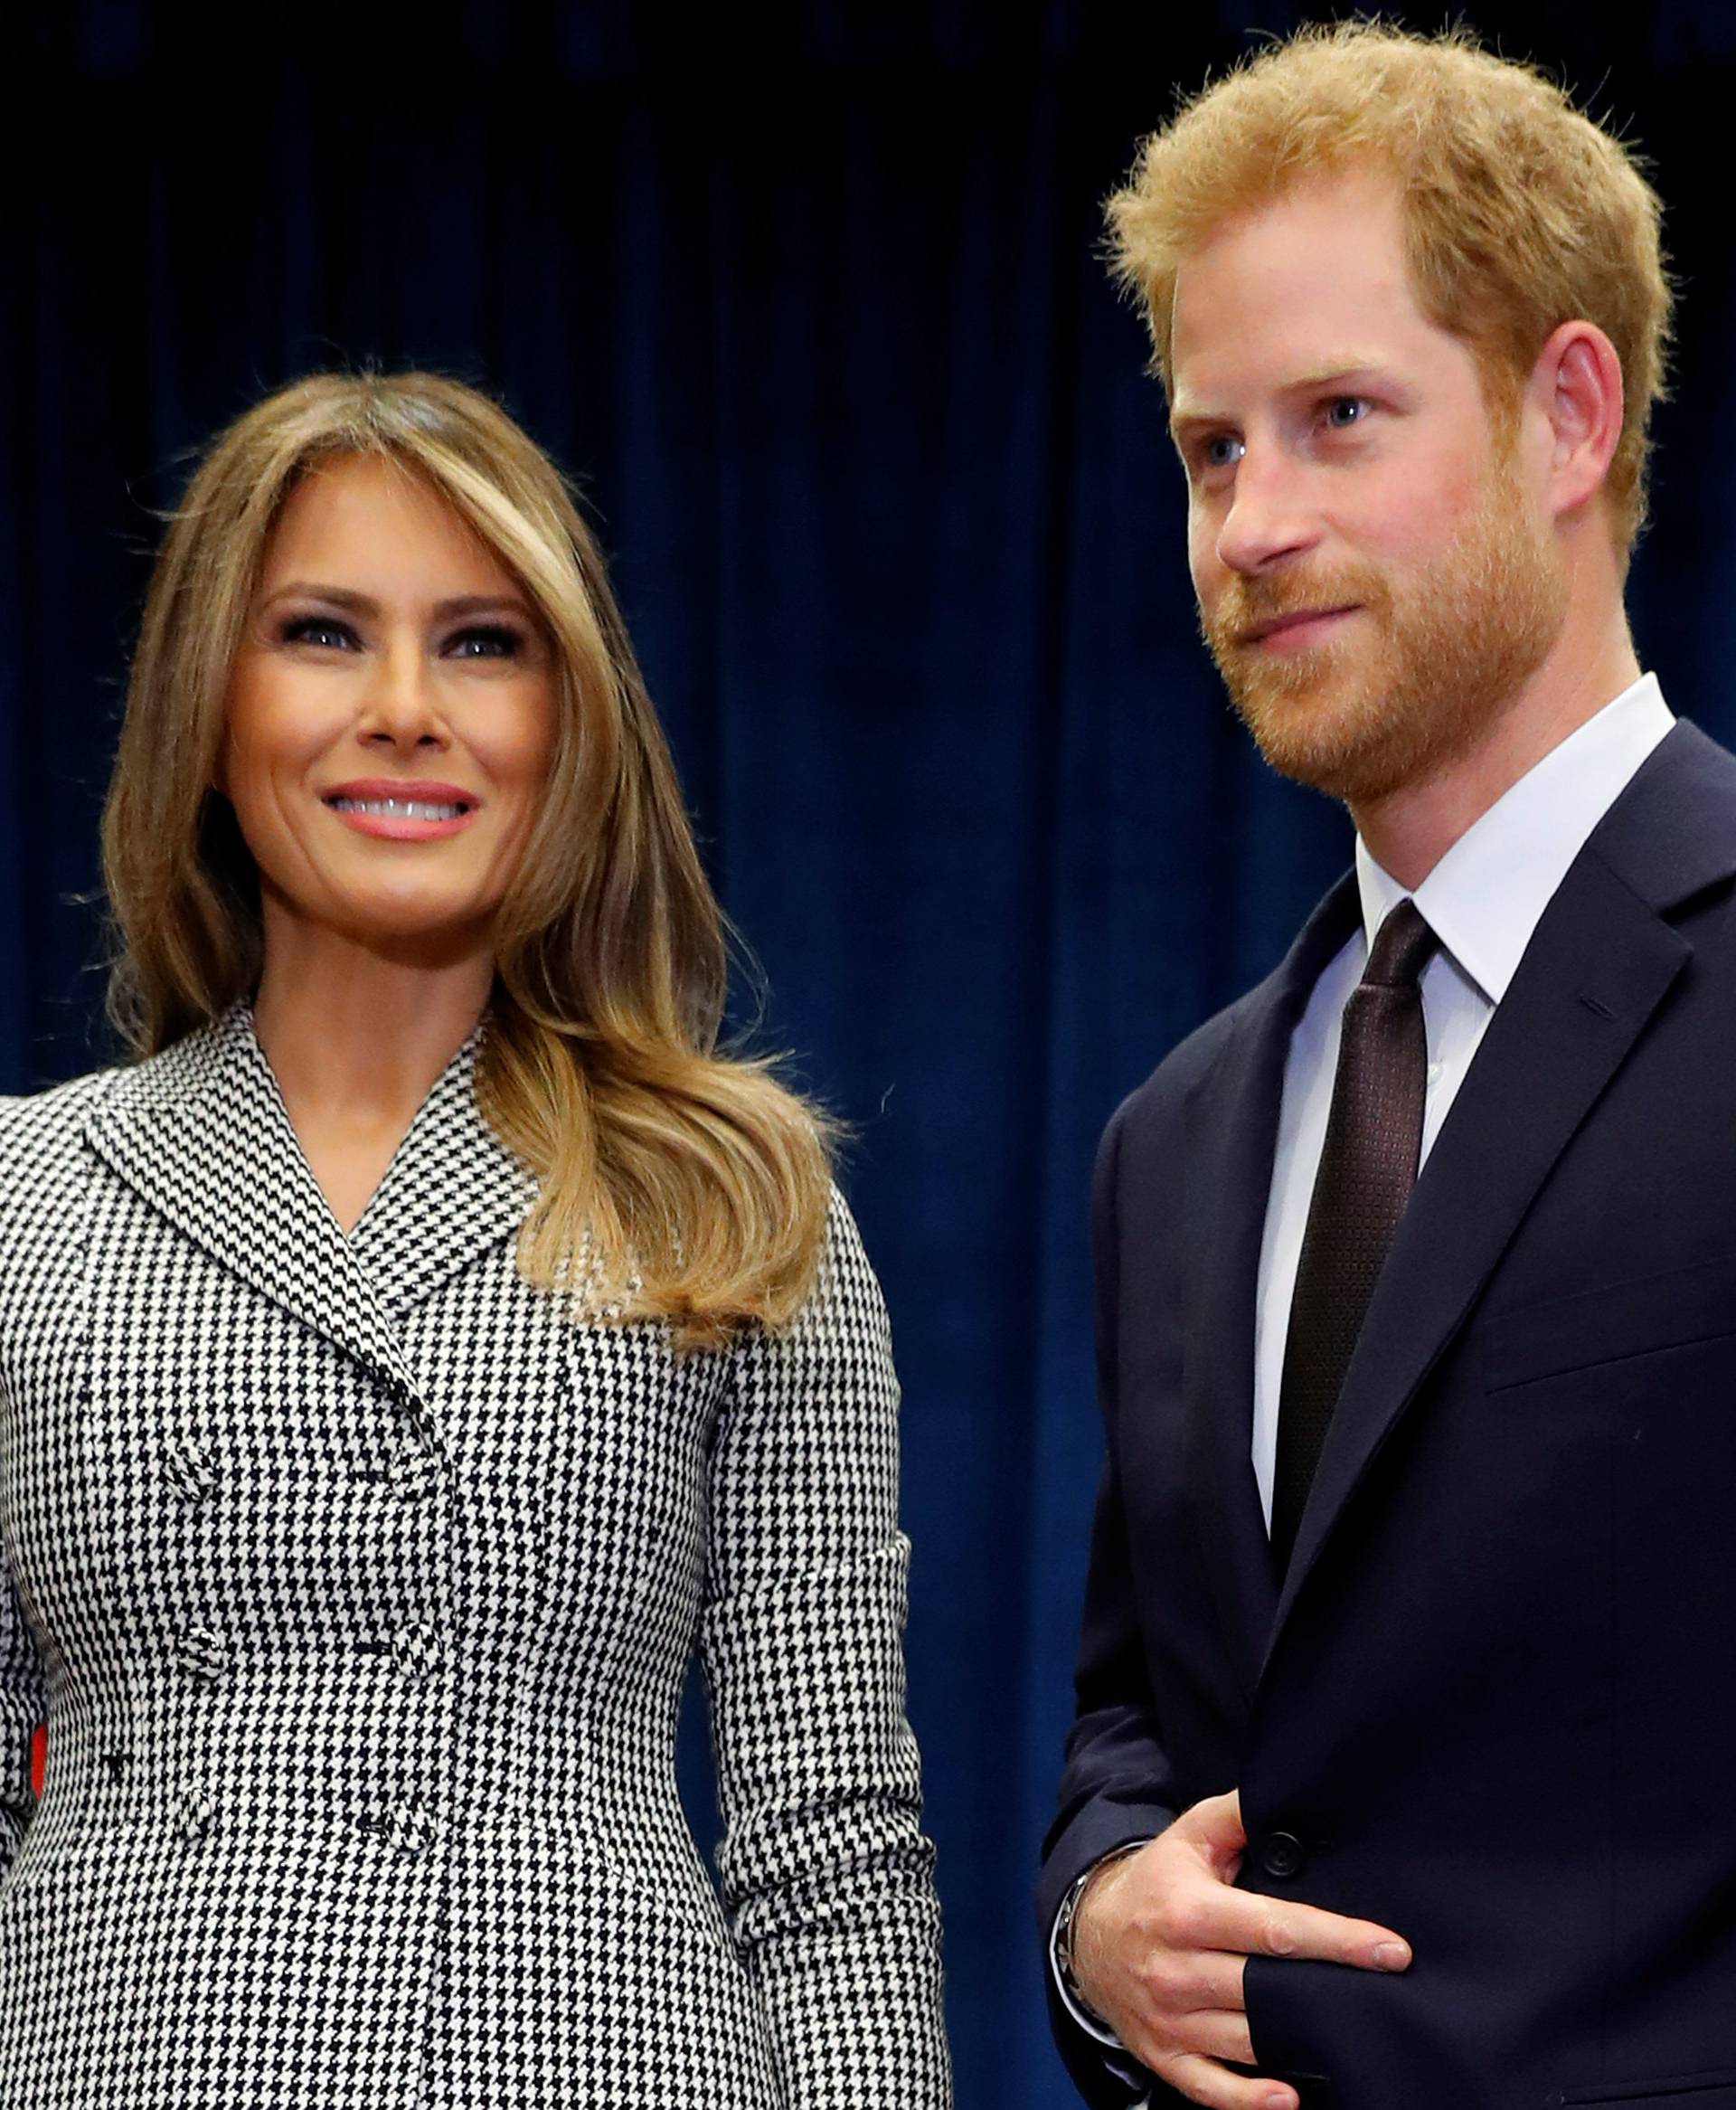 U.S. first lady Melania Trump meets with Britain's Prince Harry before attending the opening ceremony of the Invictus Games in Toronto, Canada